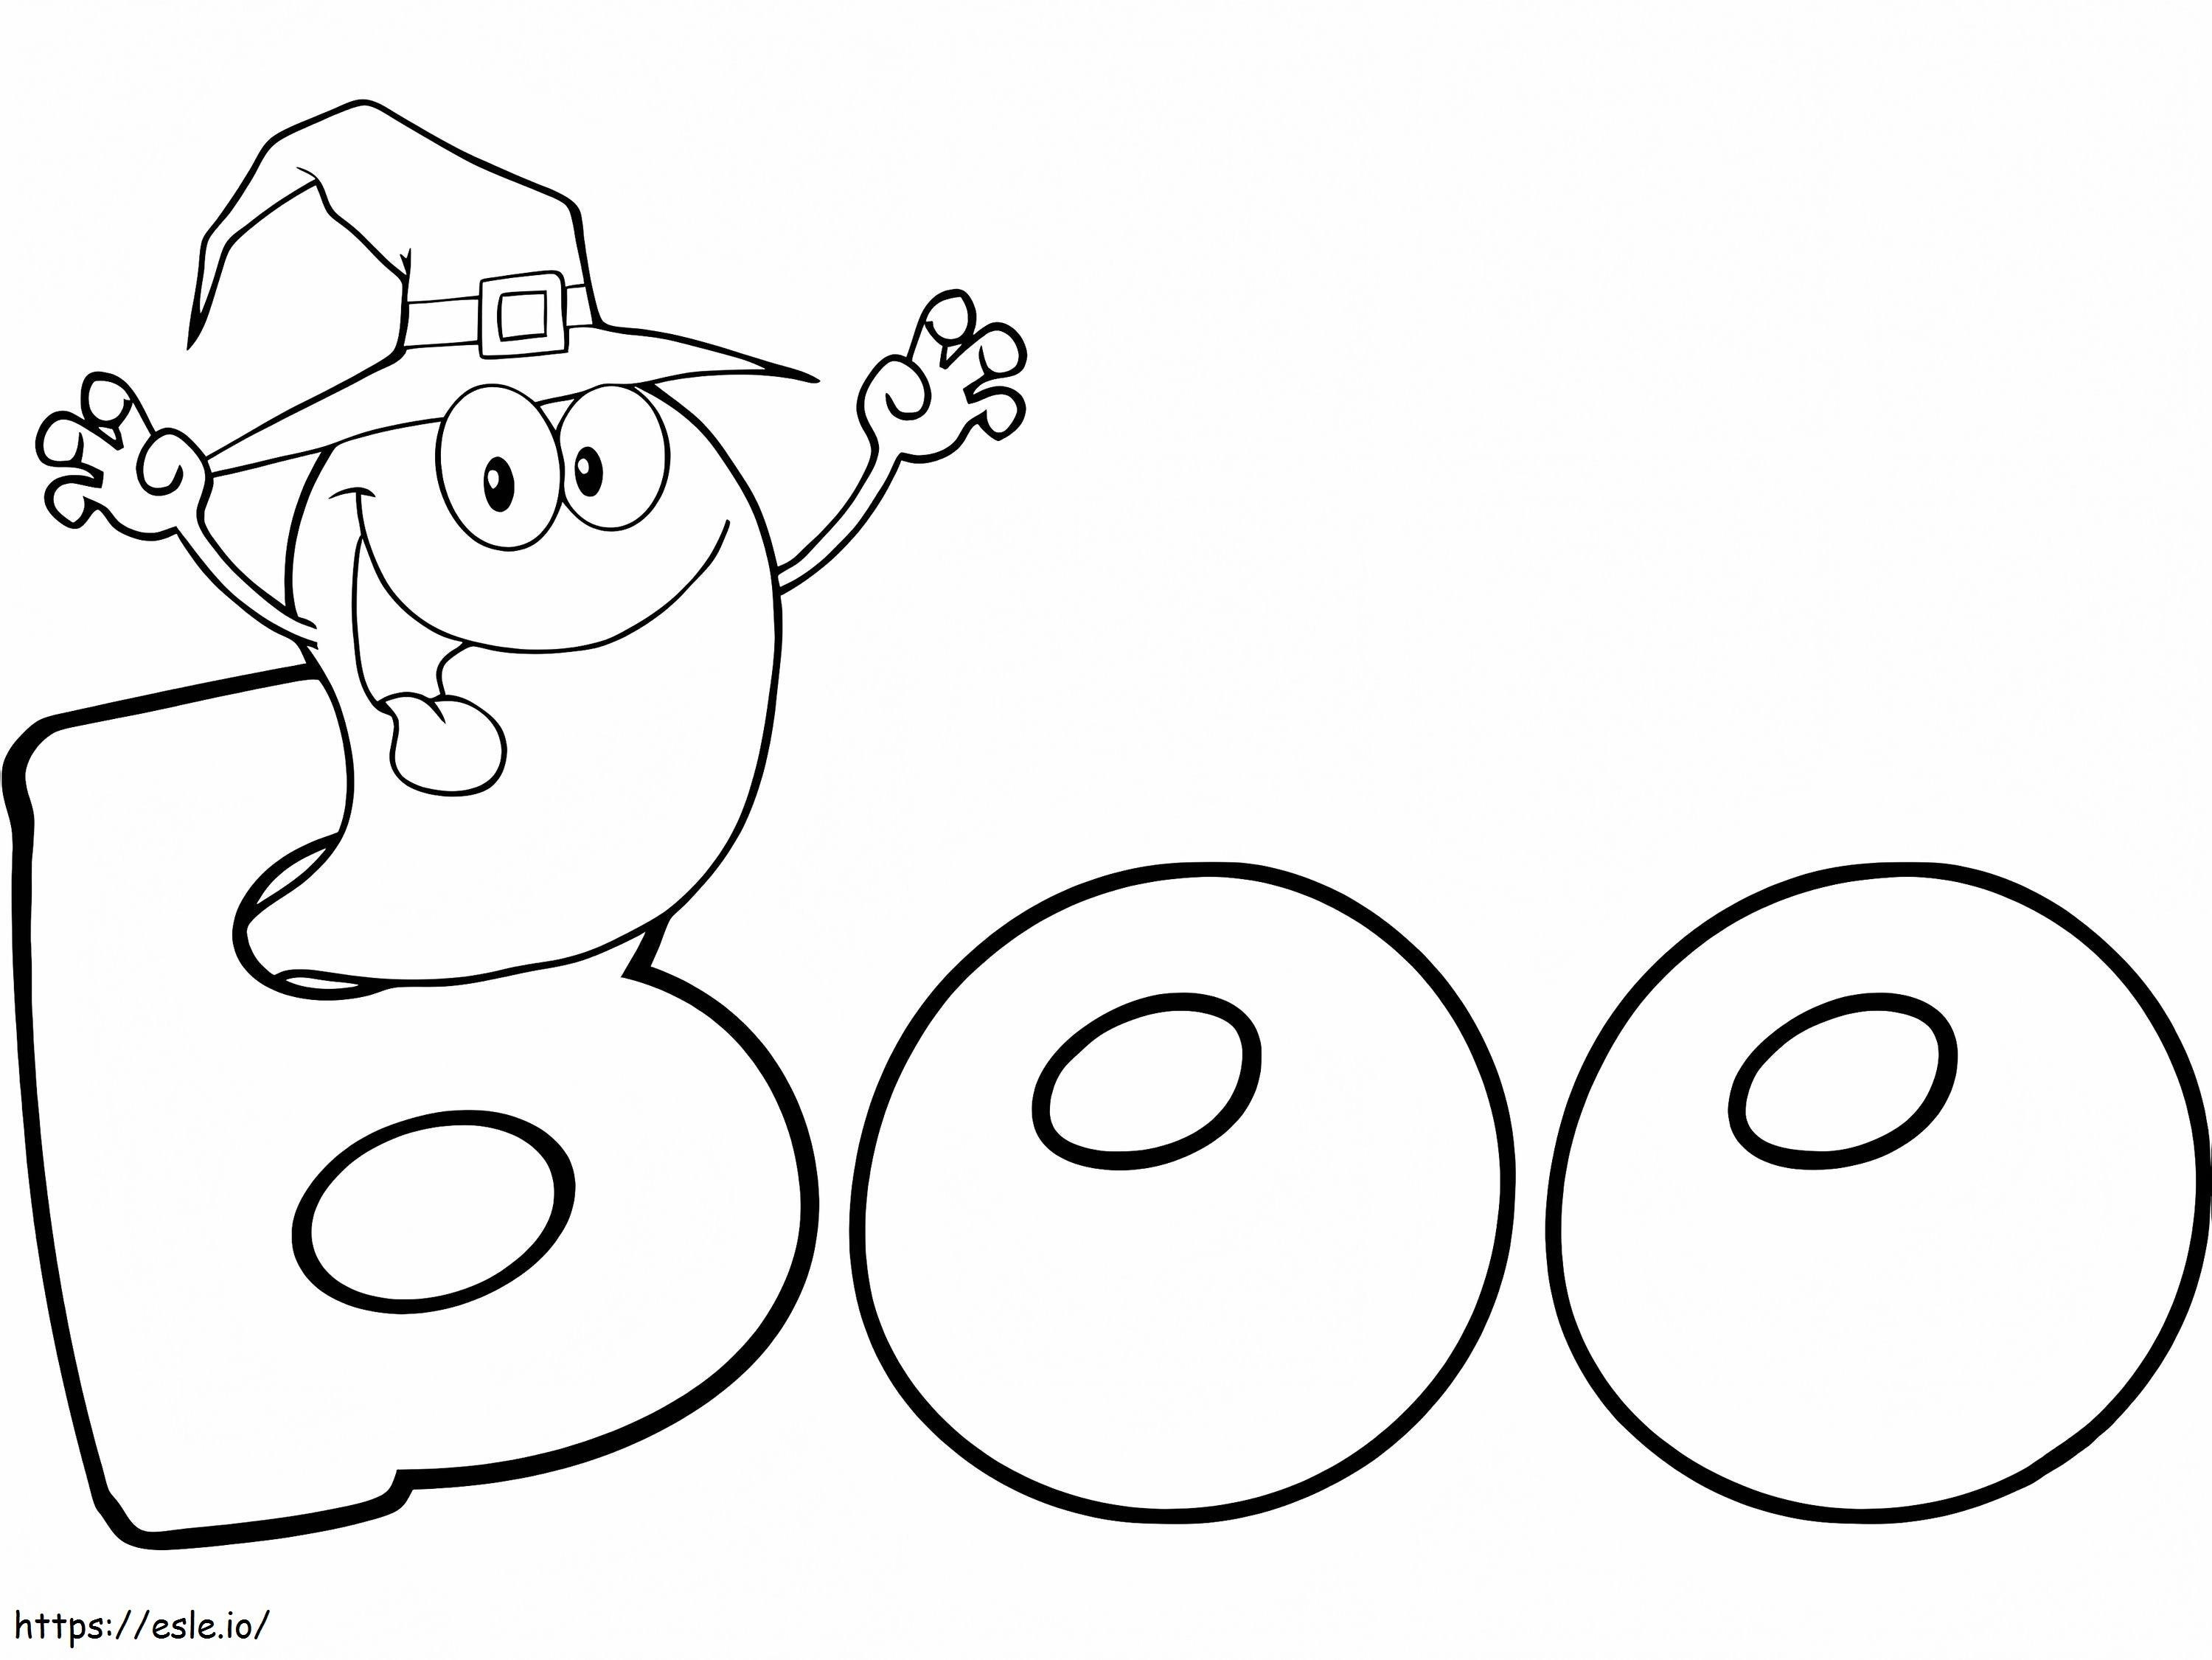 boo-coloring-page